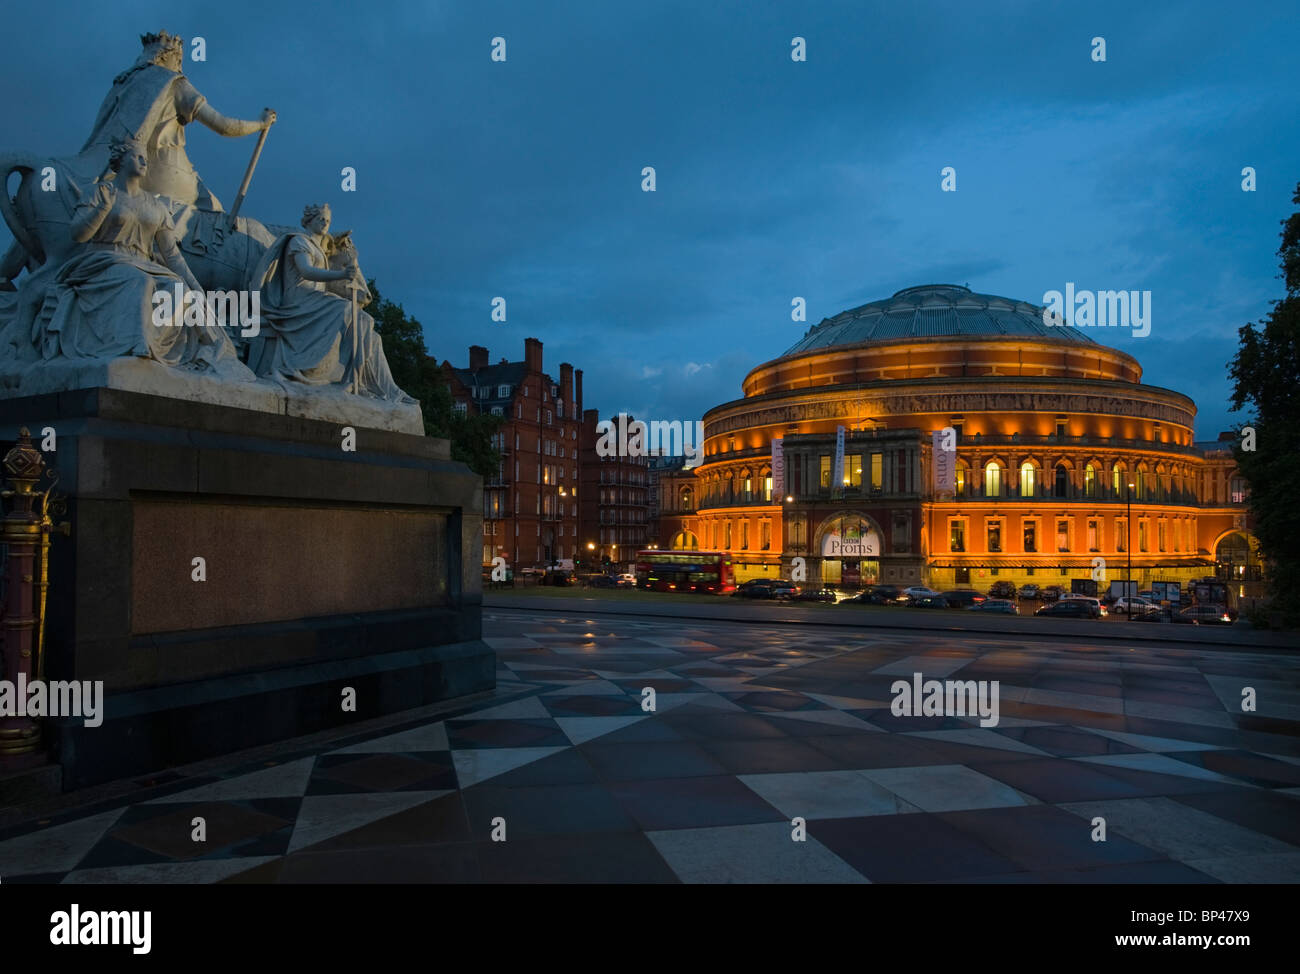 The Albert Hall and a detail of the Albert memorial illuminated at dusk during the Promenade concert season. Stock Photo